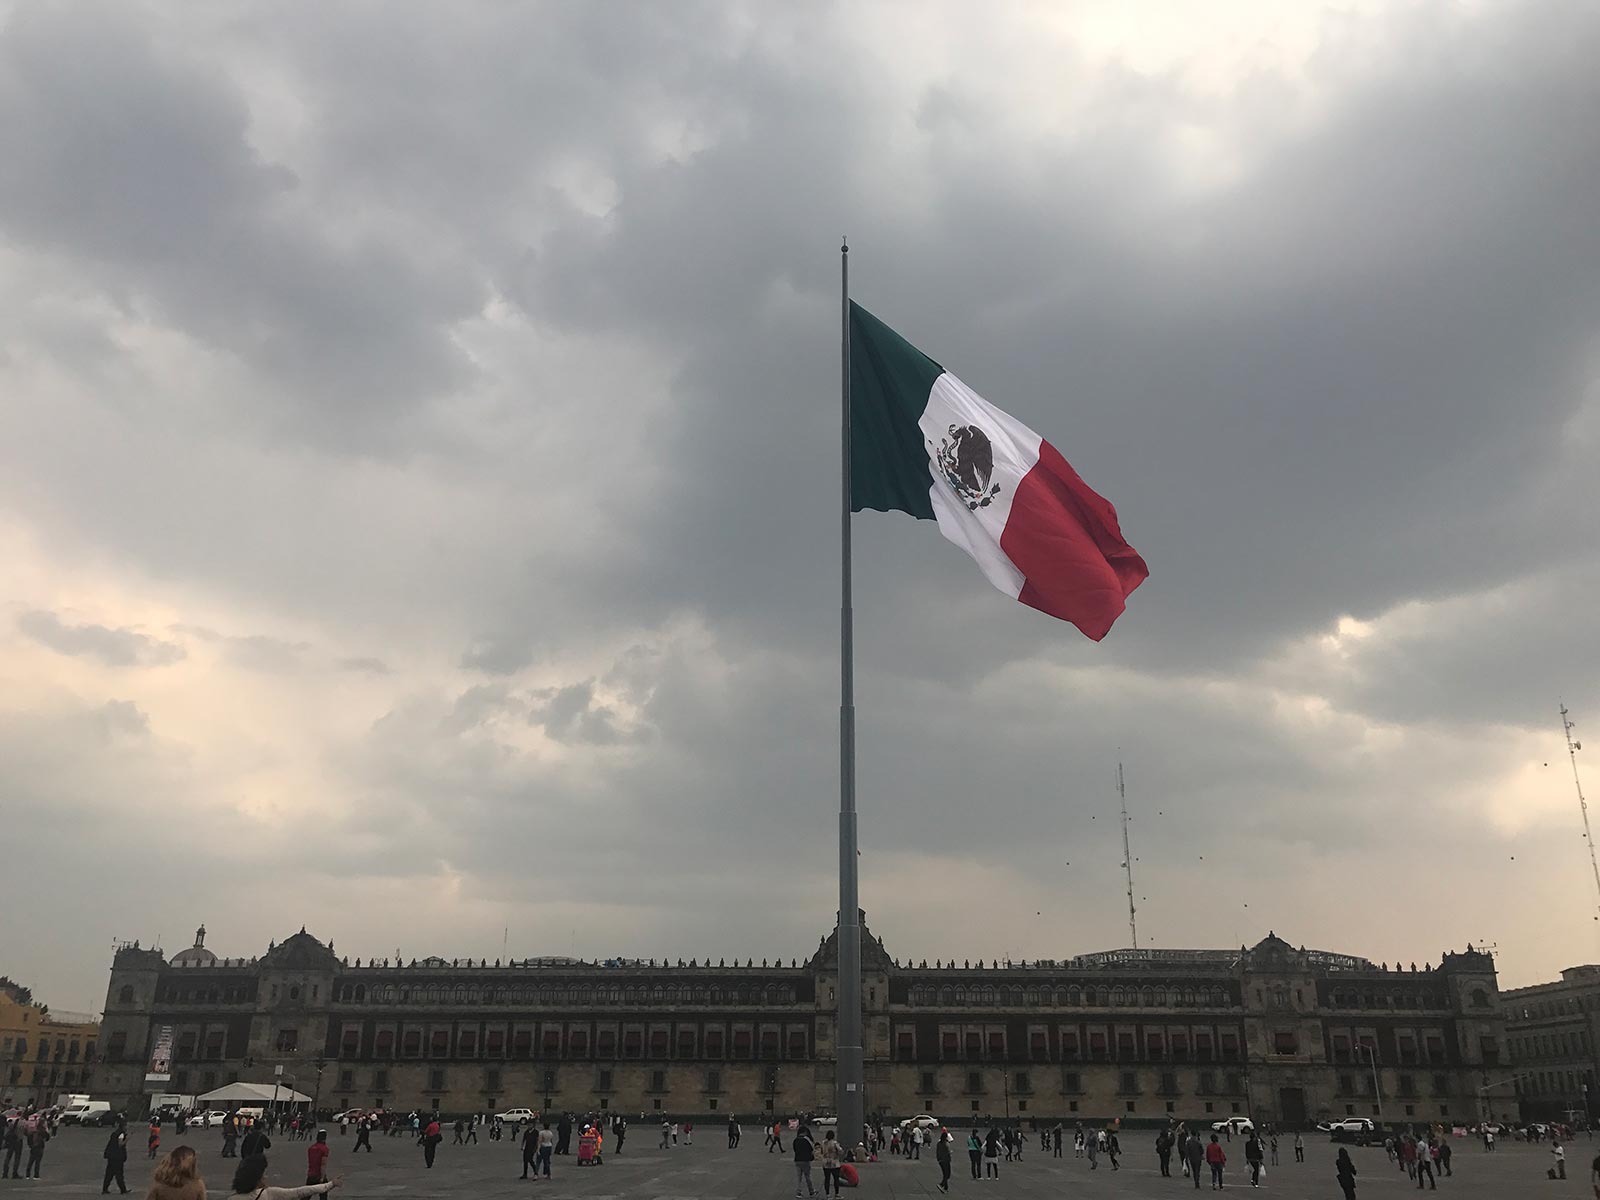 Mexican flag at Government building in Tenochtitlanin, Mexico. Mexico City & Teotihuacan